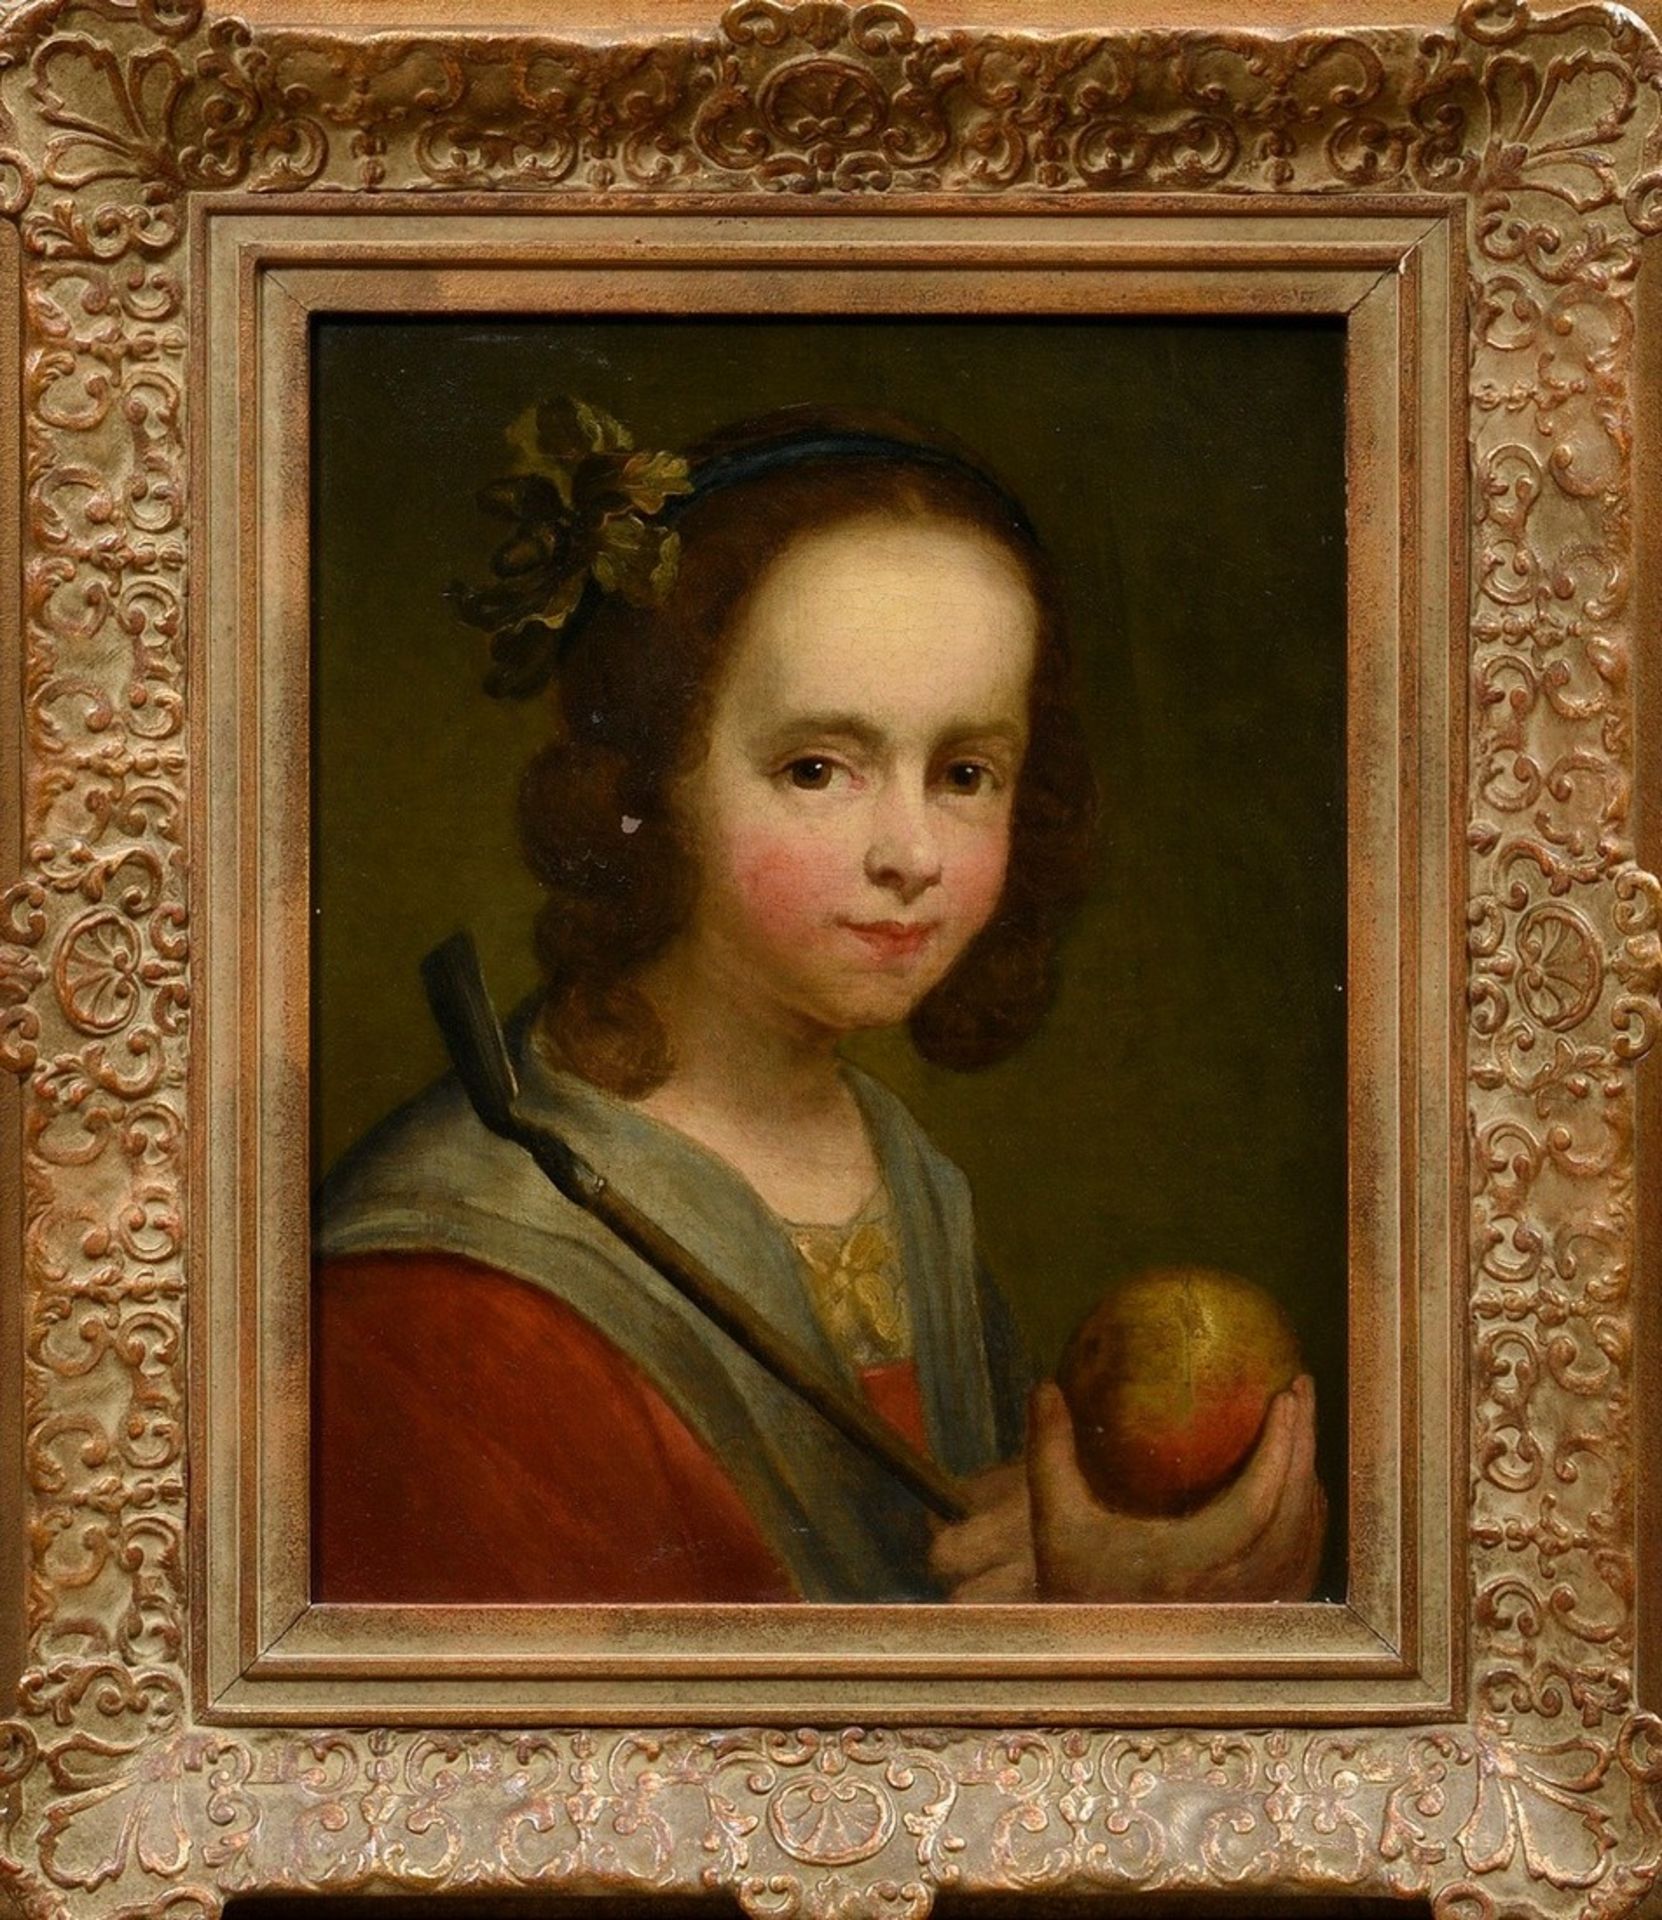 Pair of "Child Portraits" by an unknown painter of the 18th/19th c., oil/canvas on wood, magnificen - Image 7 of 8